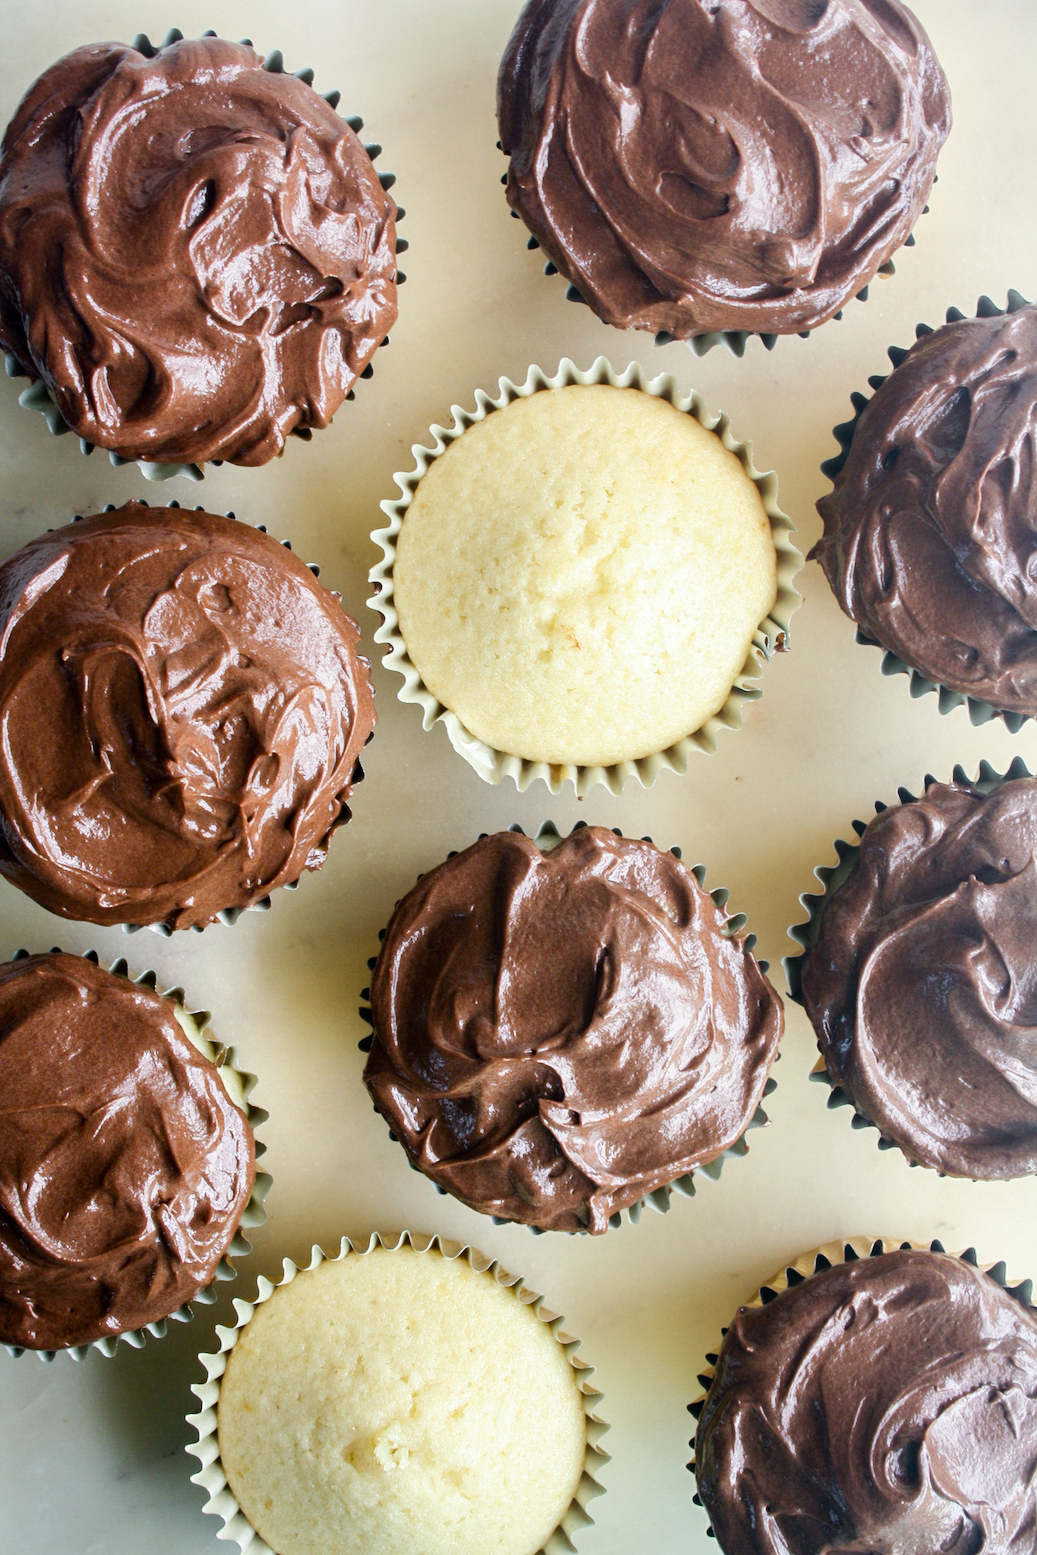 Perfect moist yellow cake cupcakes with a silky chocolate frosting